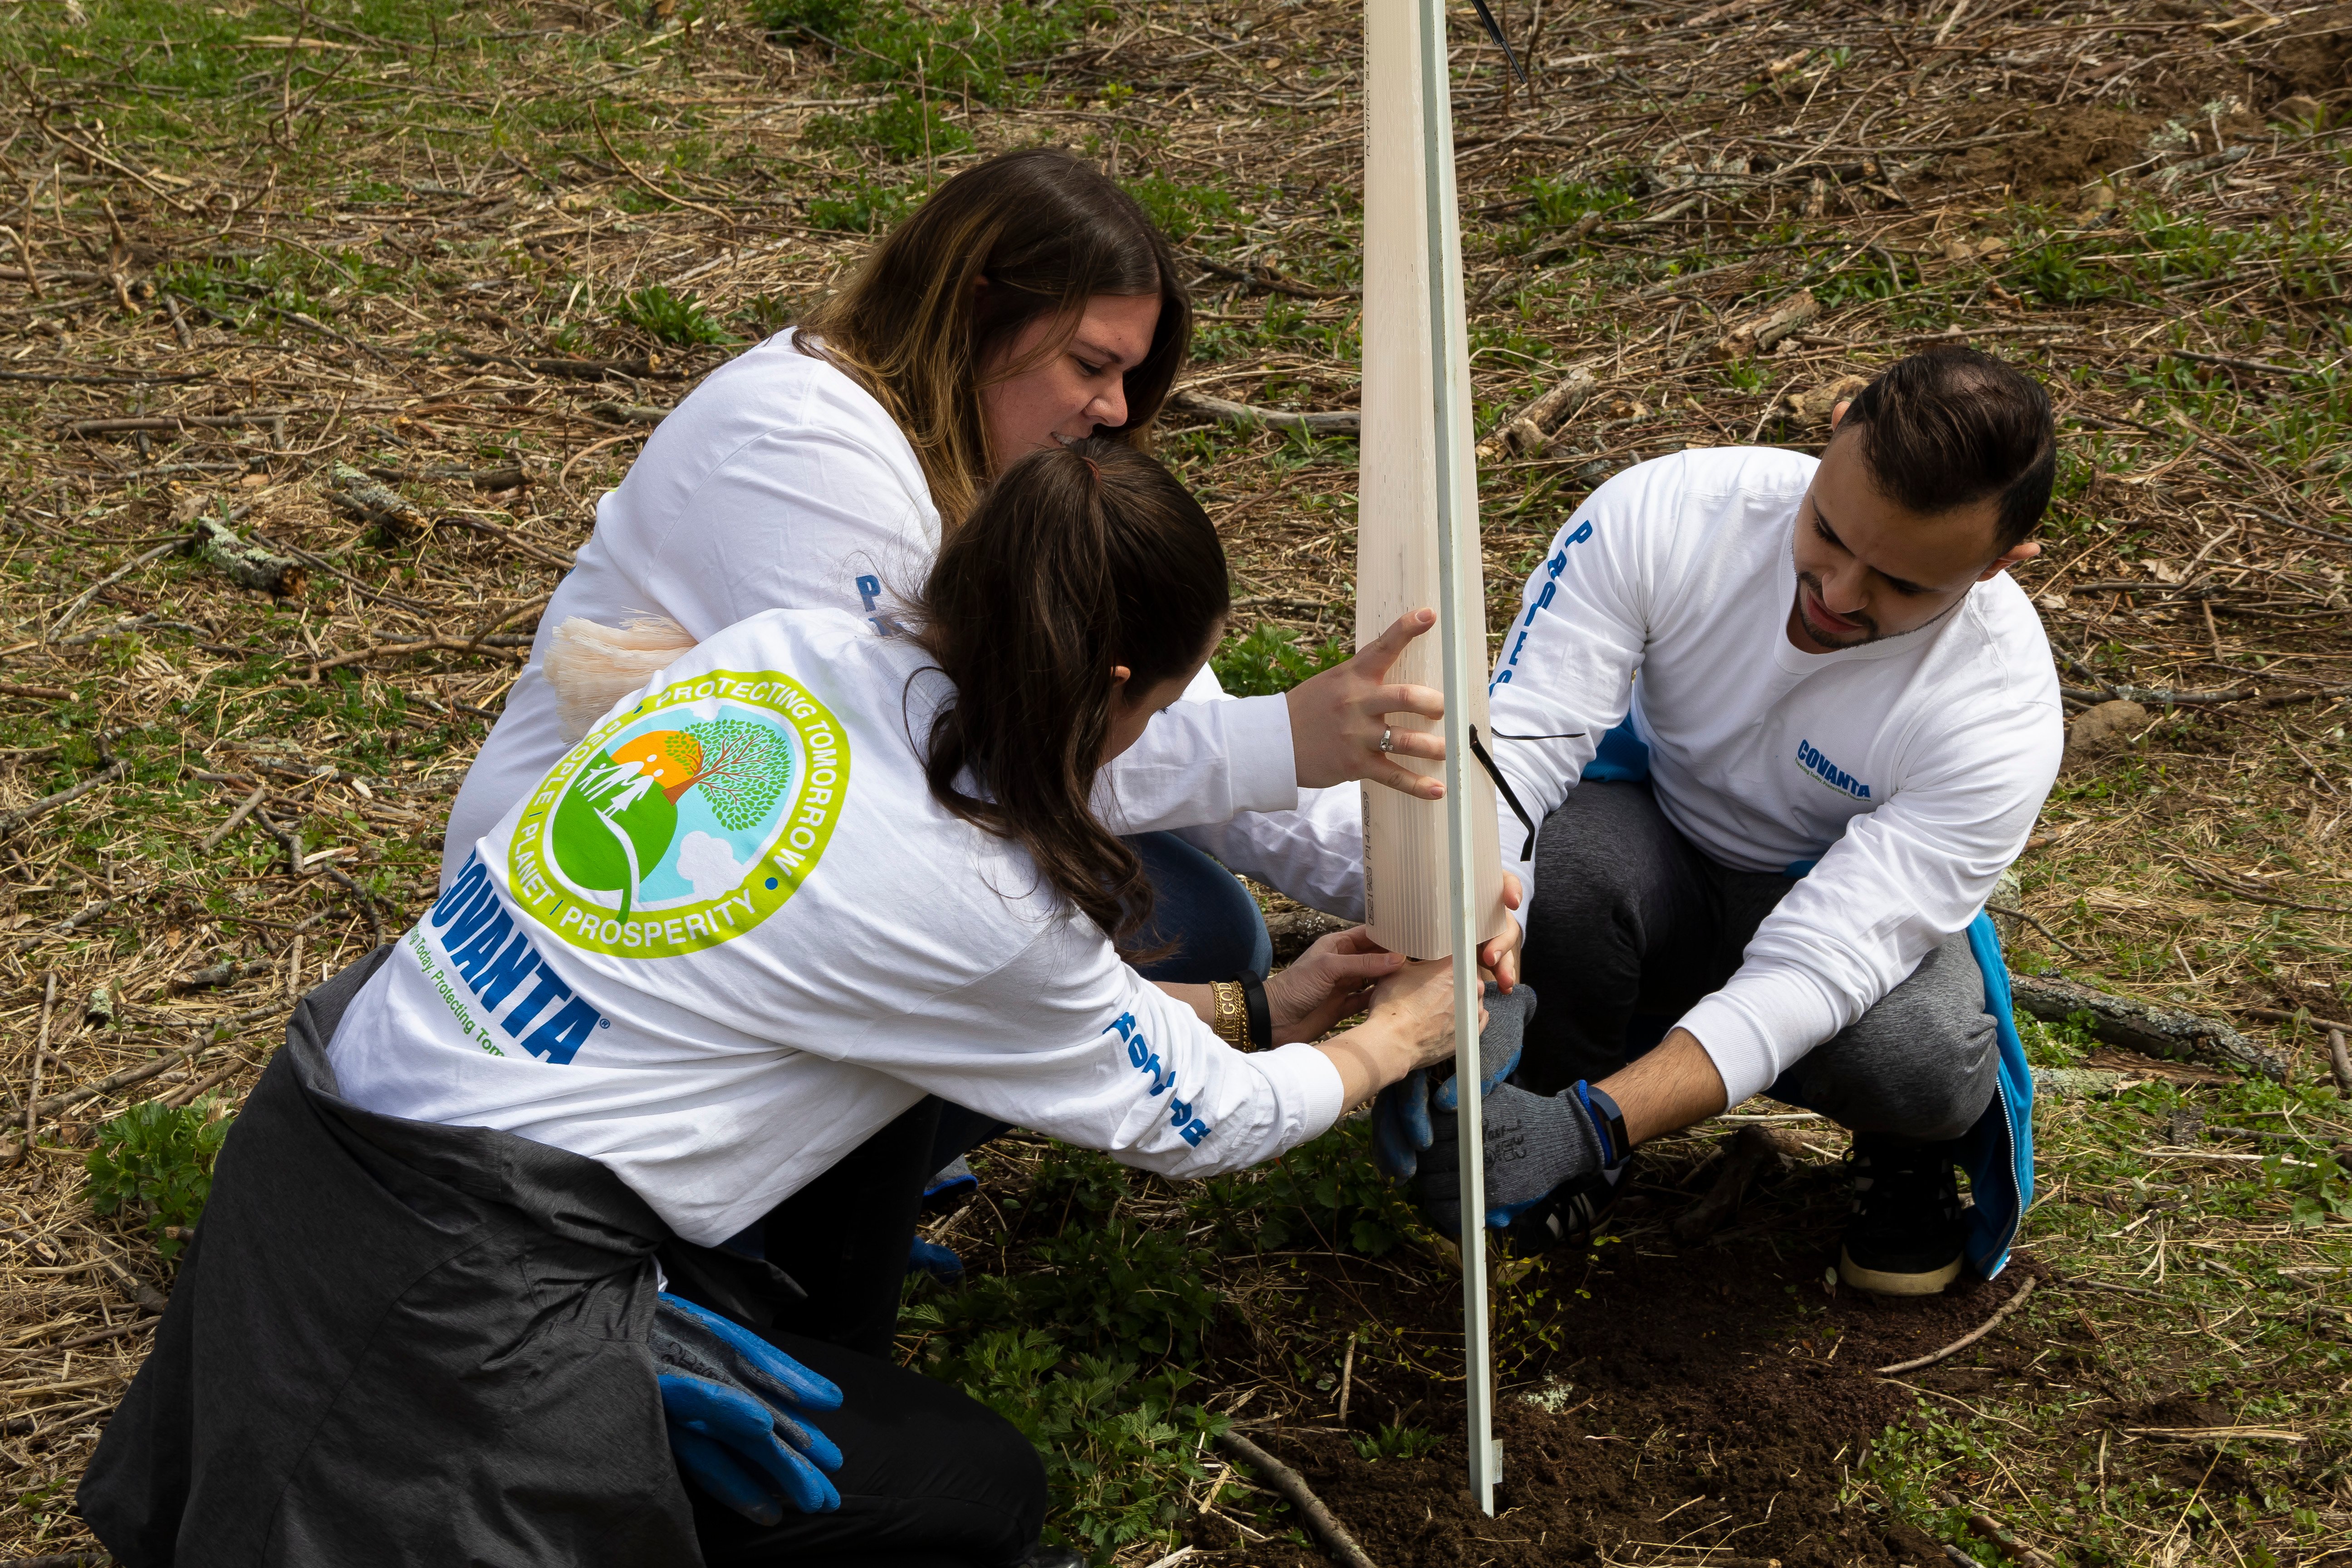 Covanta employees planting trees and flowers in a Morristown park